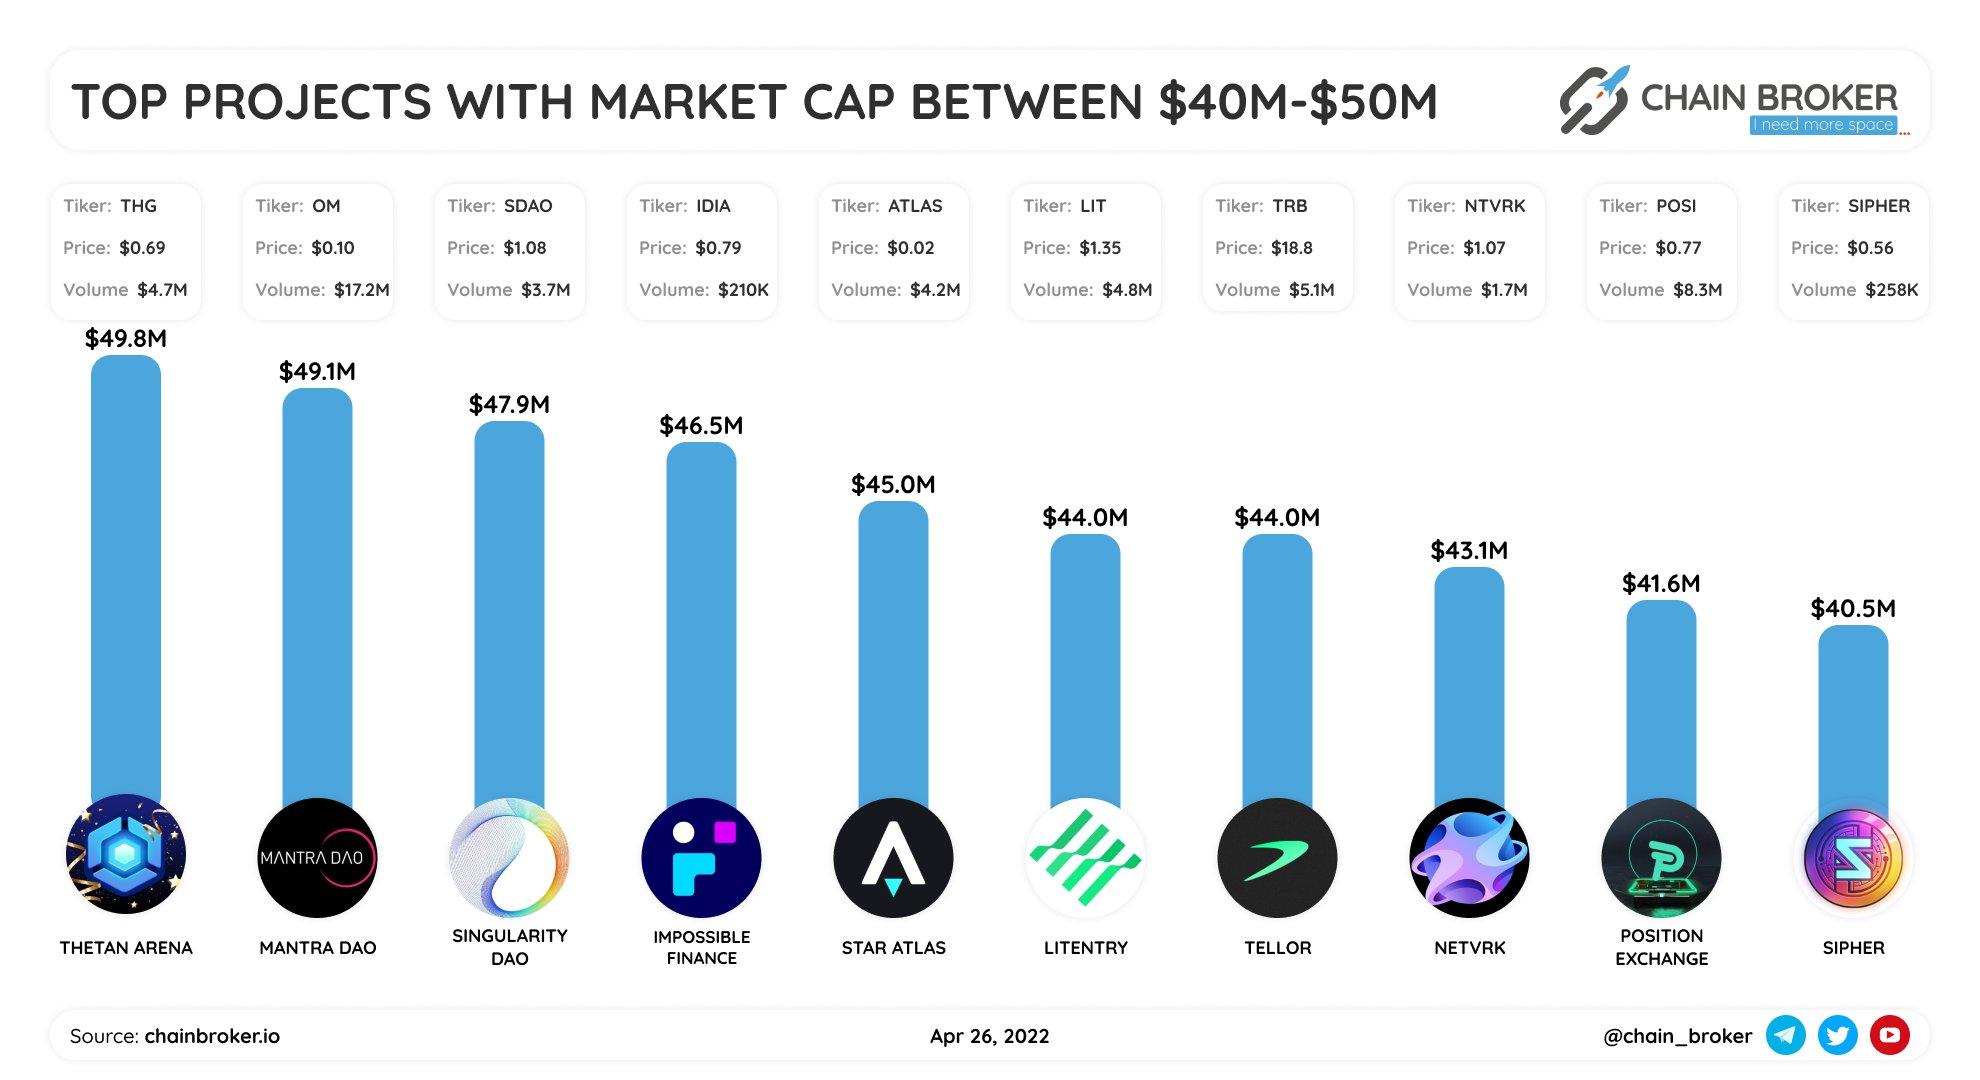 Top projects with market cap between $40M-$50M